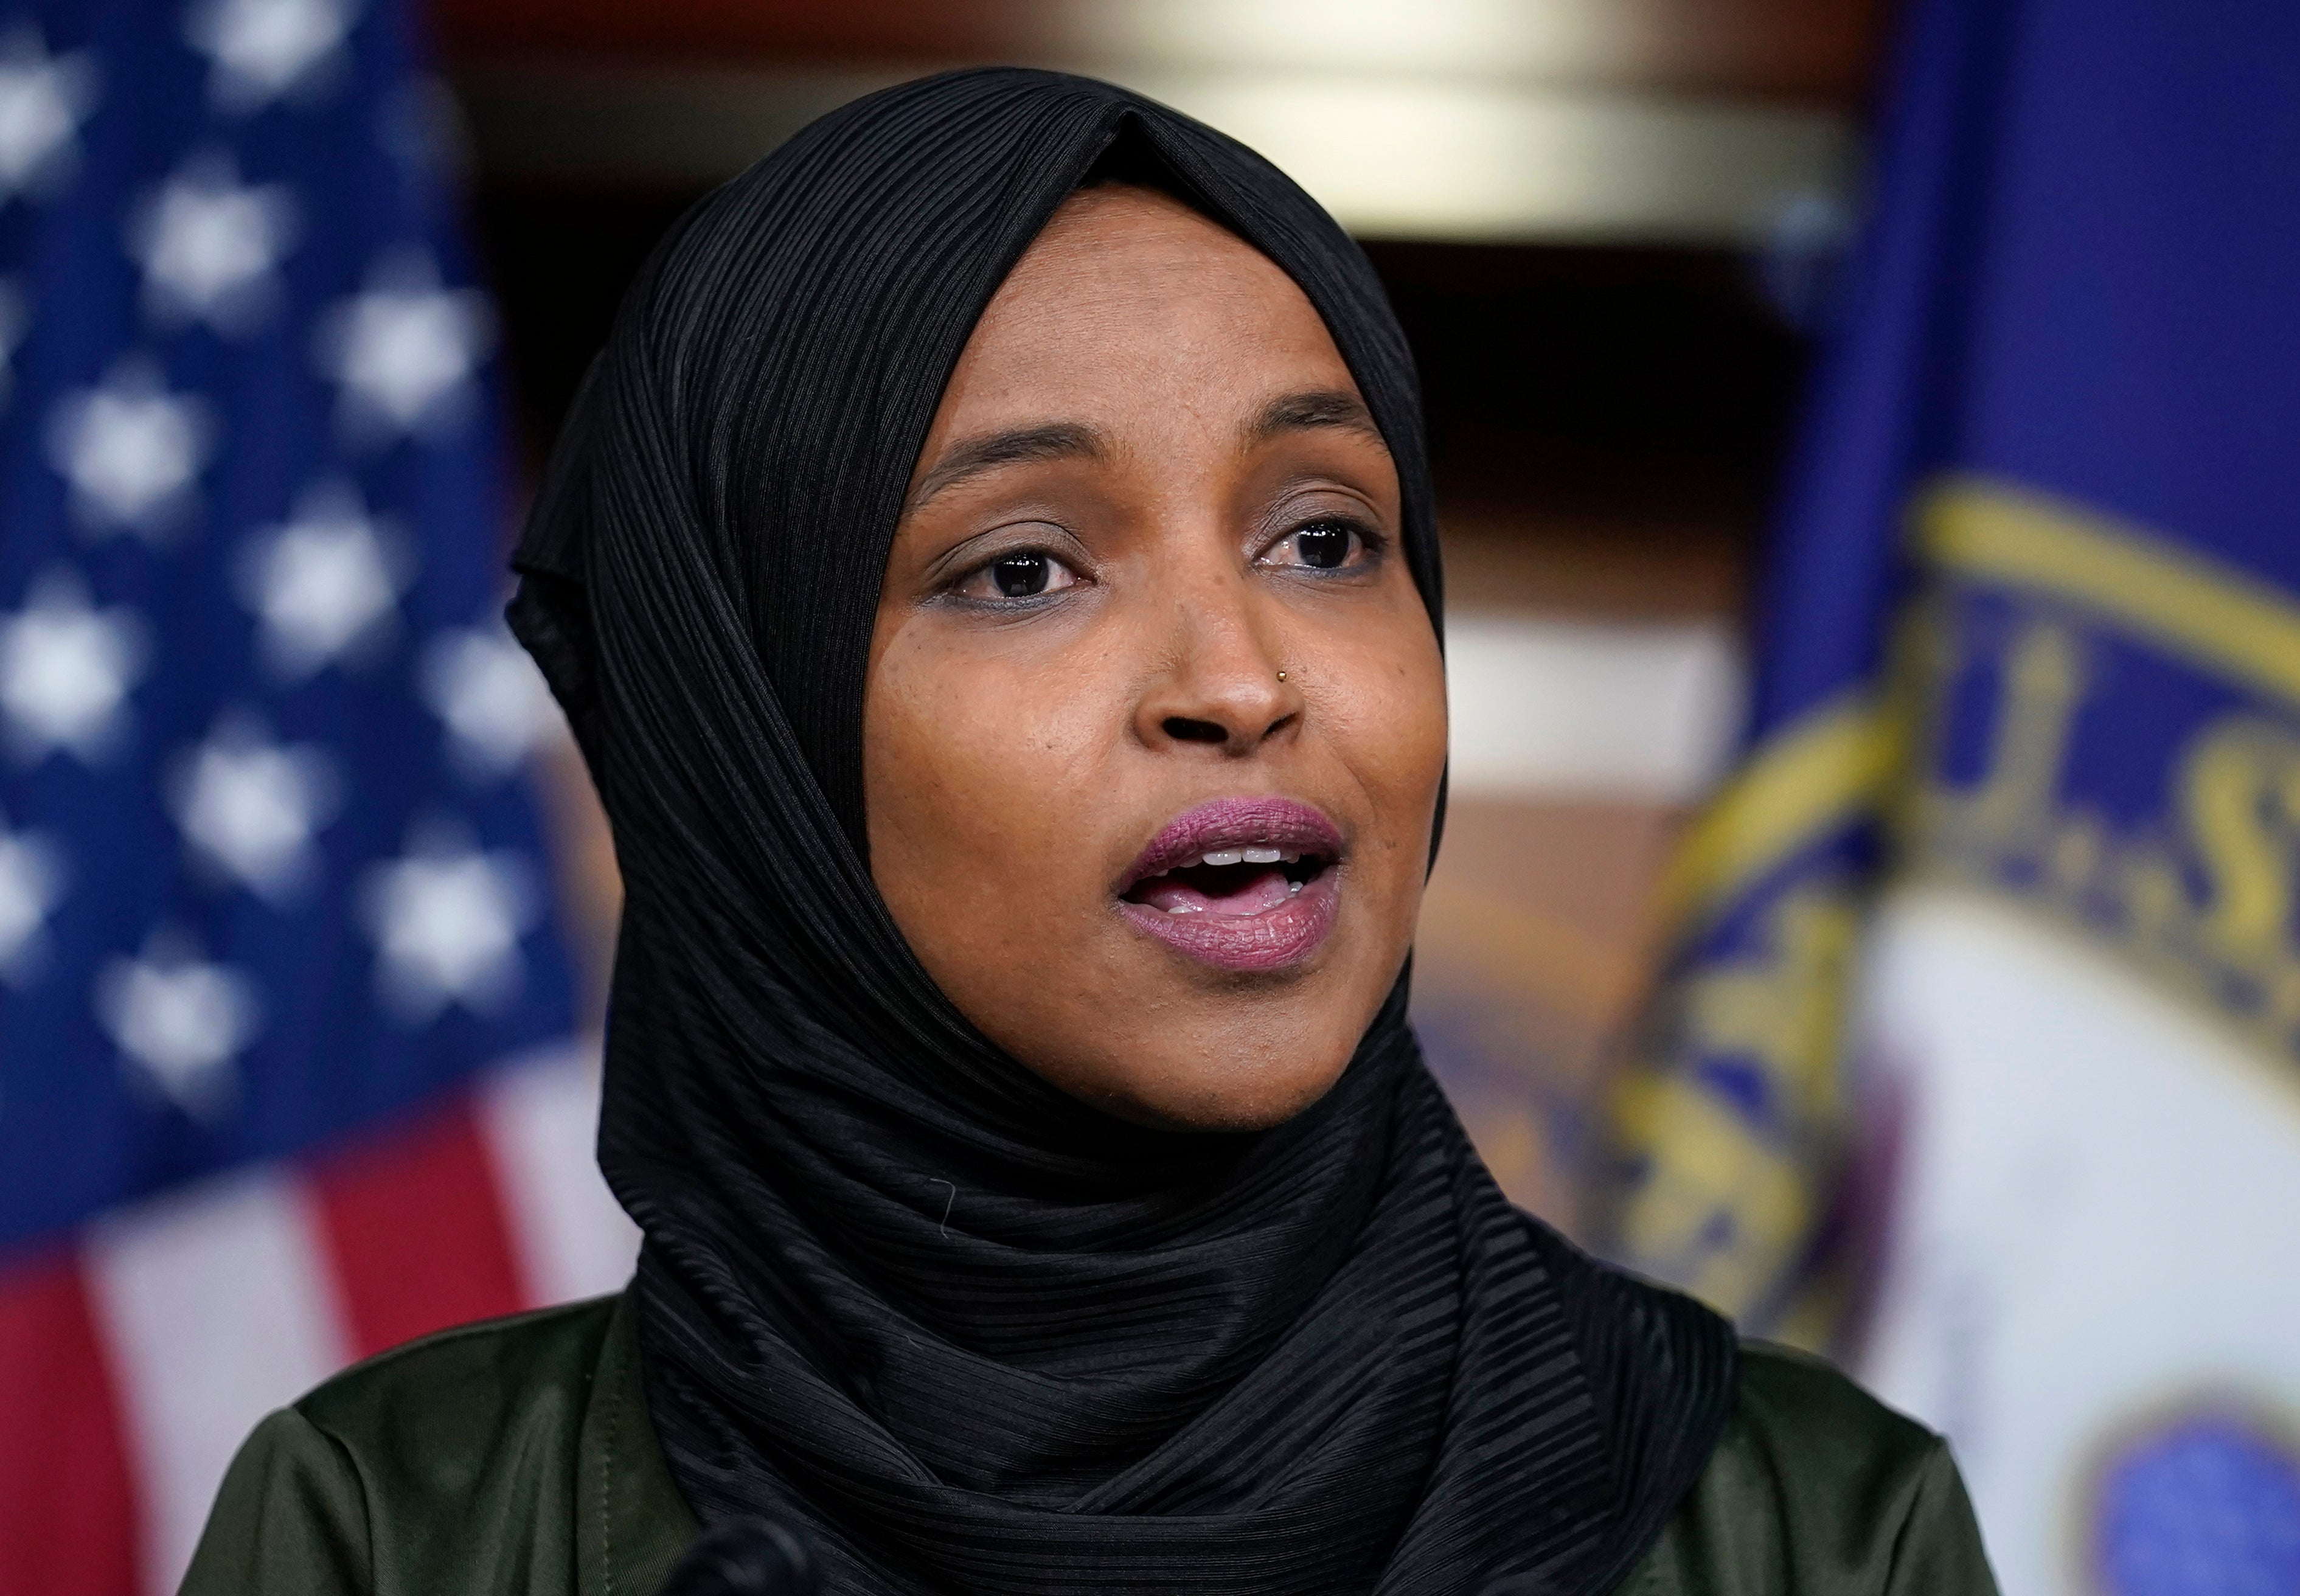 The US Federal Election Commission voted unanimously that it found no wrongdoing from Democratic congresswoman Ilhan Omar